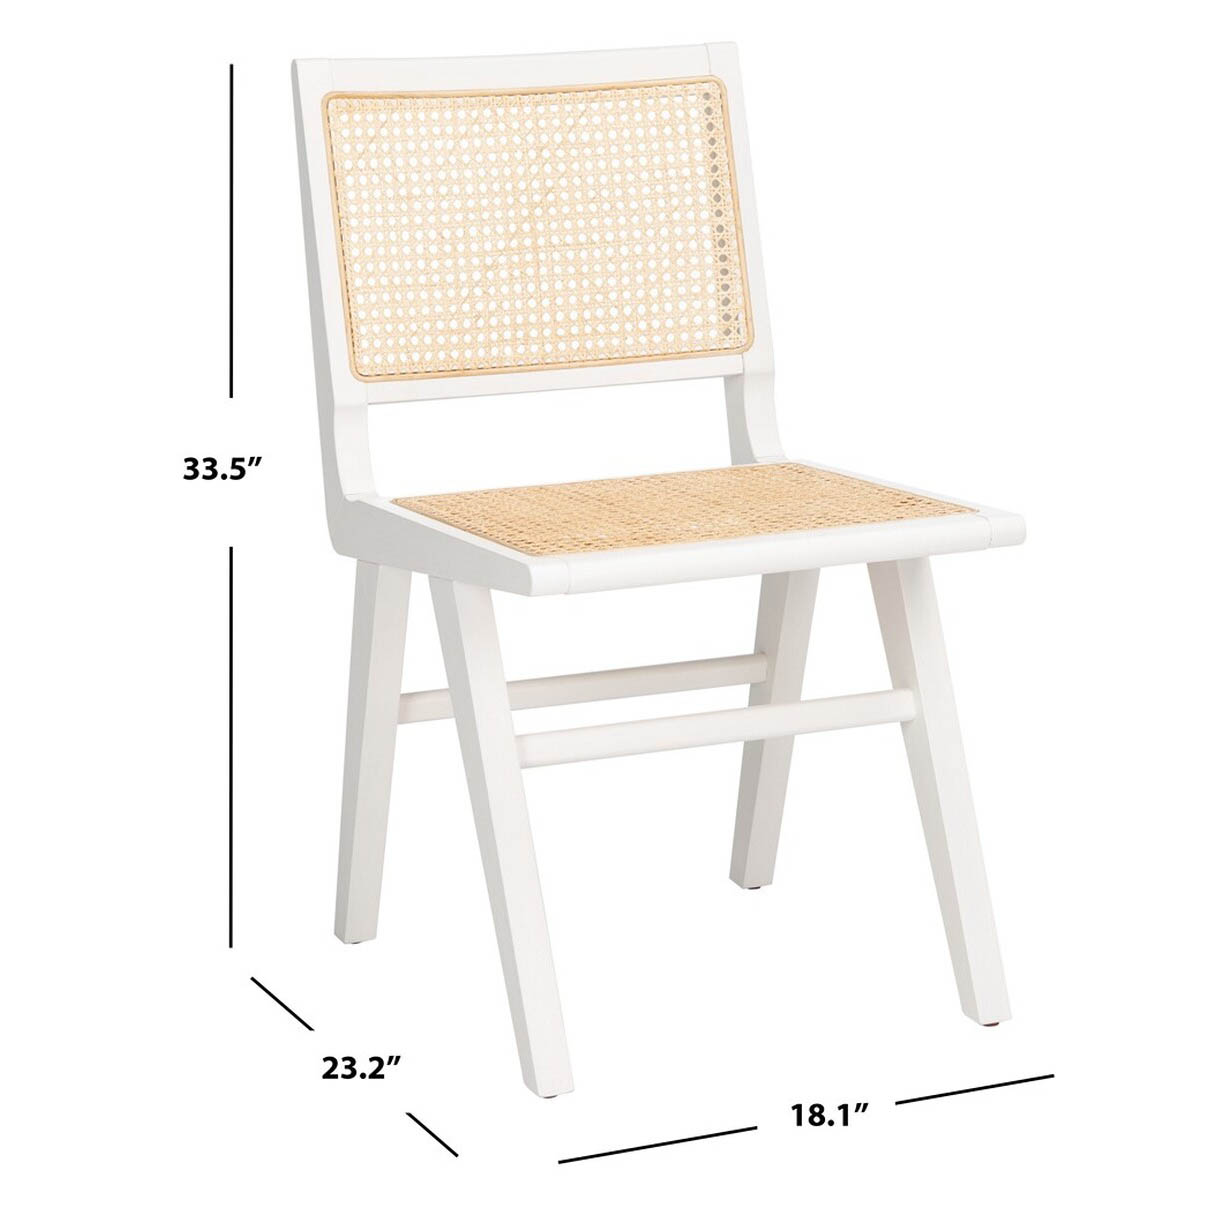 Hattie French Cane Dining Chairs (Set of 2) in White/Natural by Safavieh